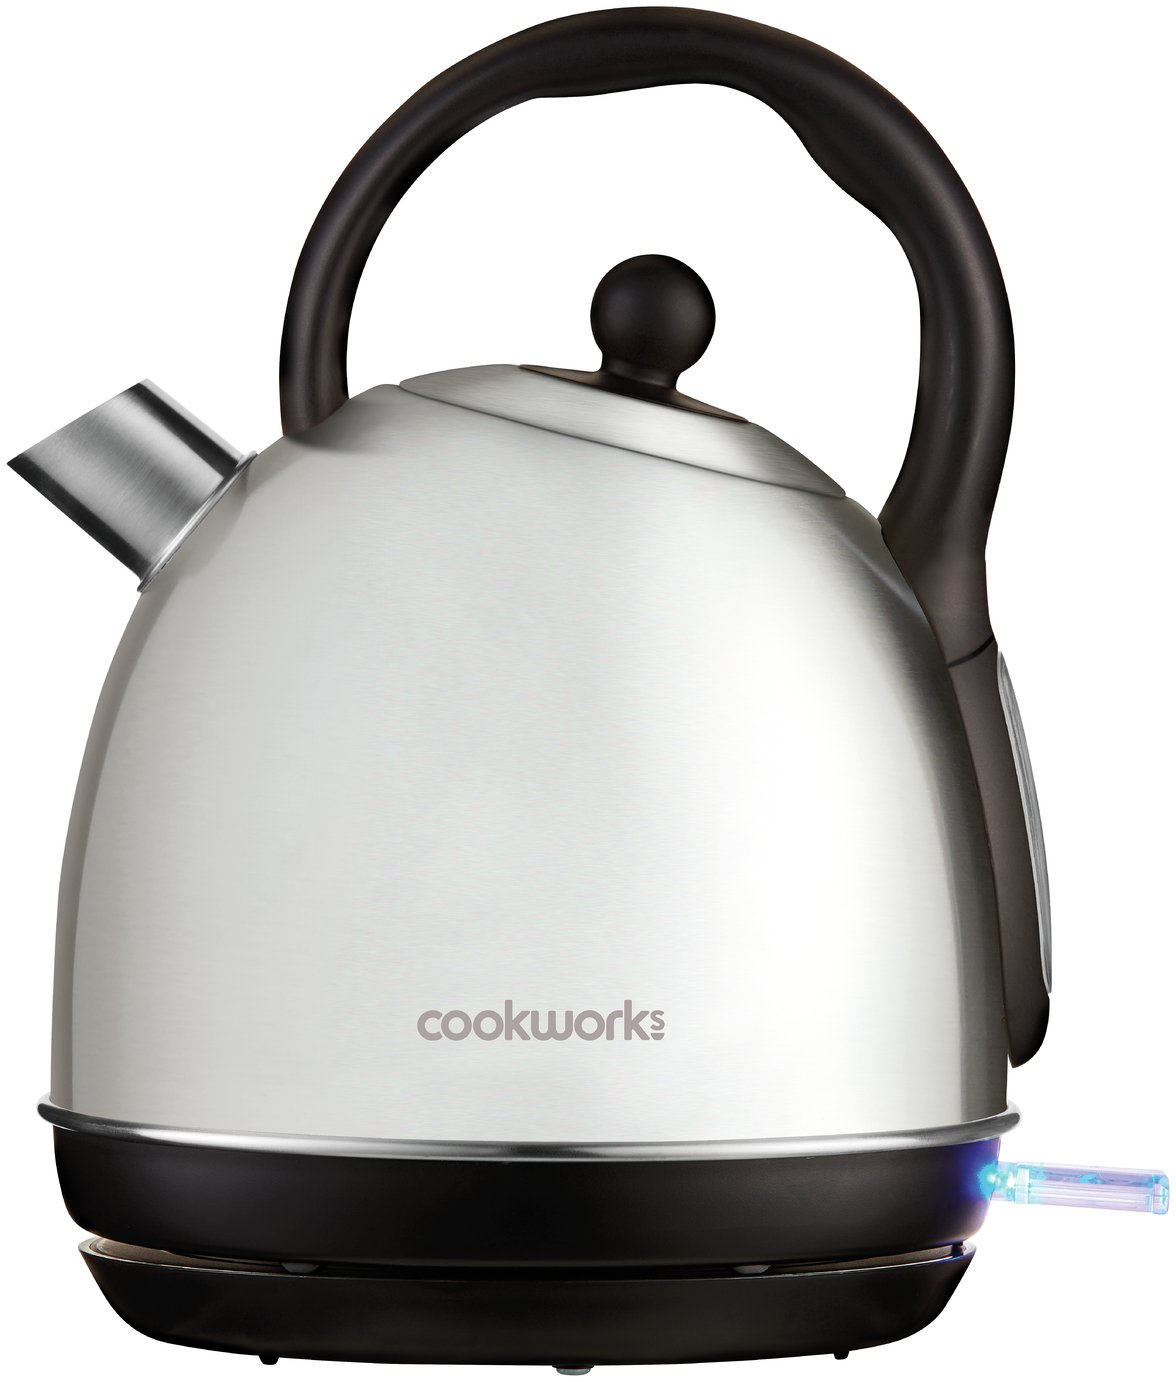 Cookworks Traditional Kettle - Brushed Stainless Steel